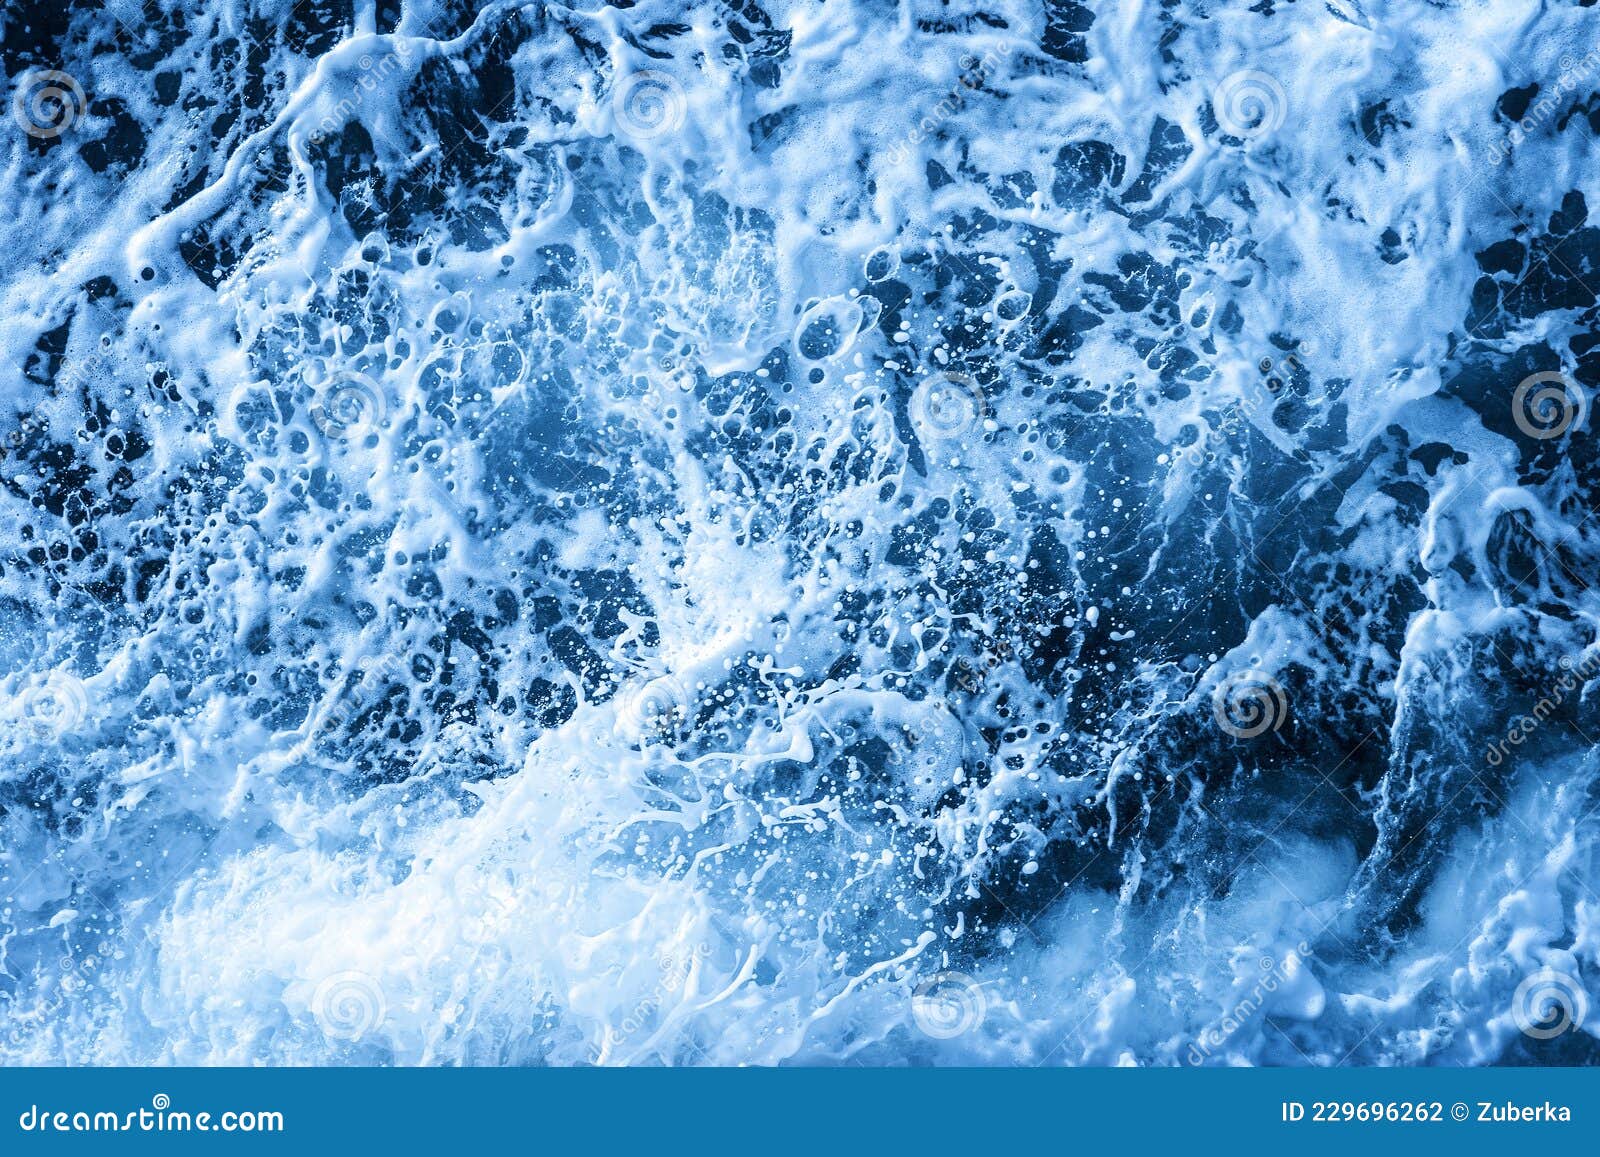 Aerial Ocean Water Foam Background Stock Photo - Image of holiday ...